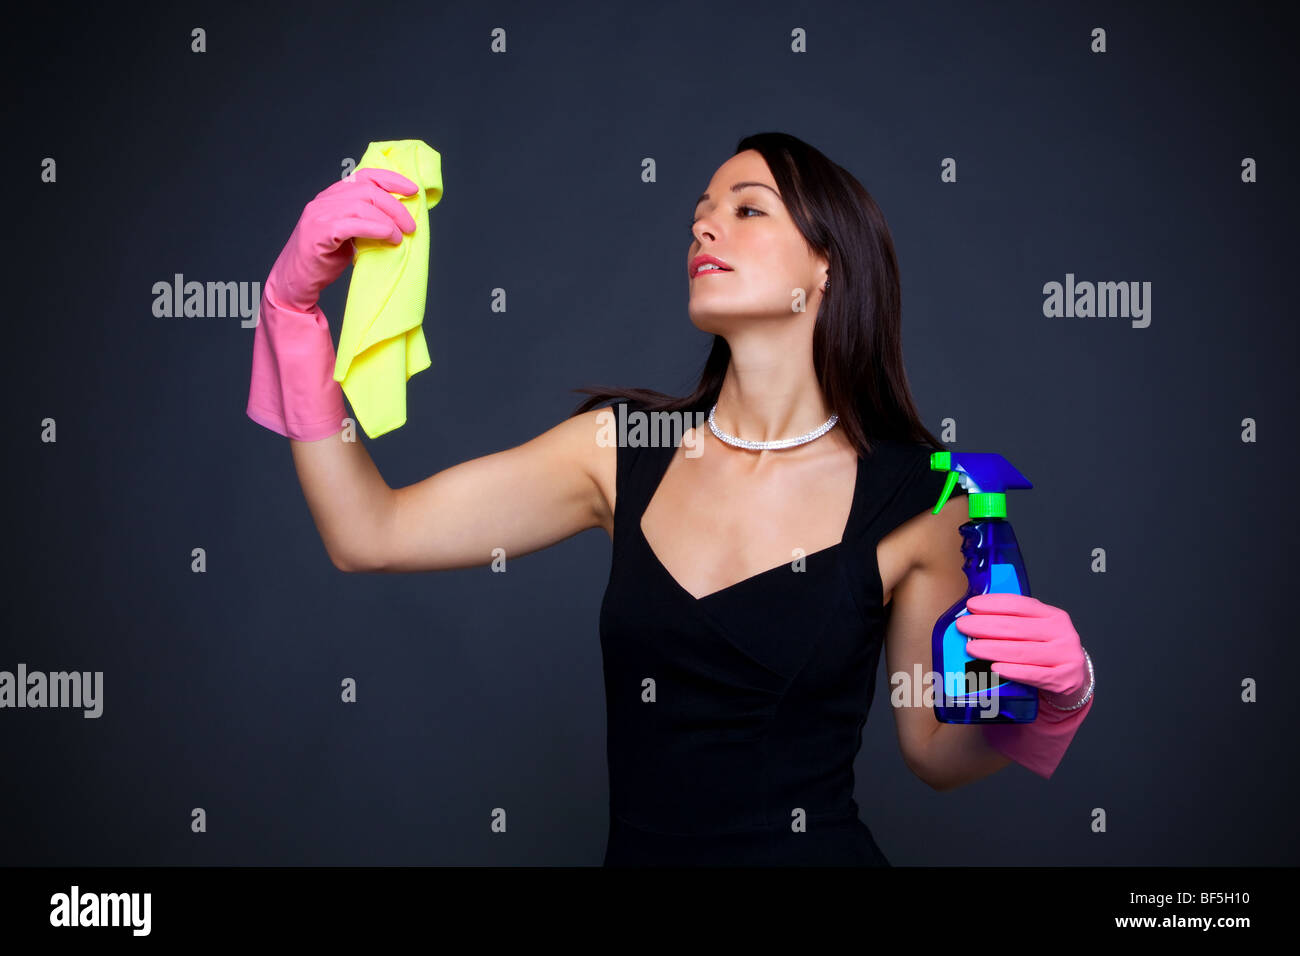 Abstract image of a glamorous housewife all dressed up to do the dusting. Stock Photo